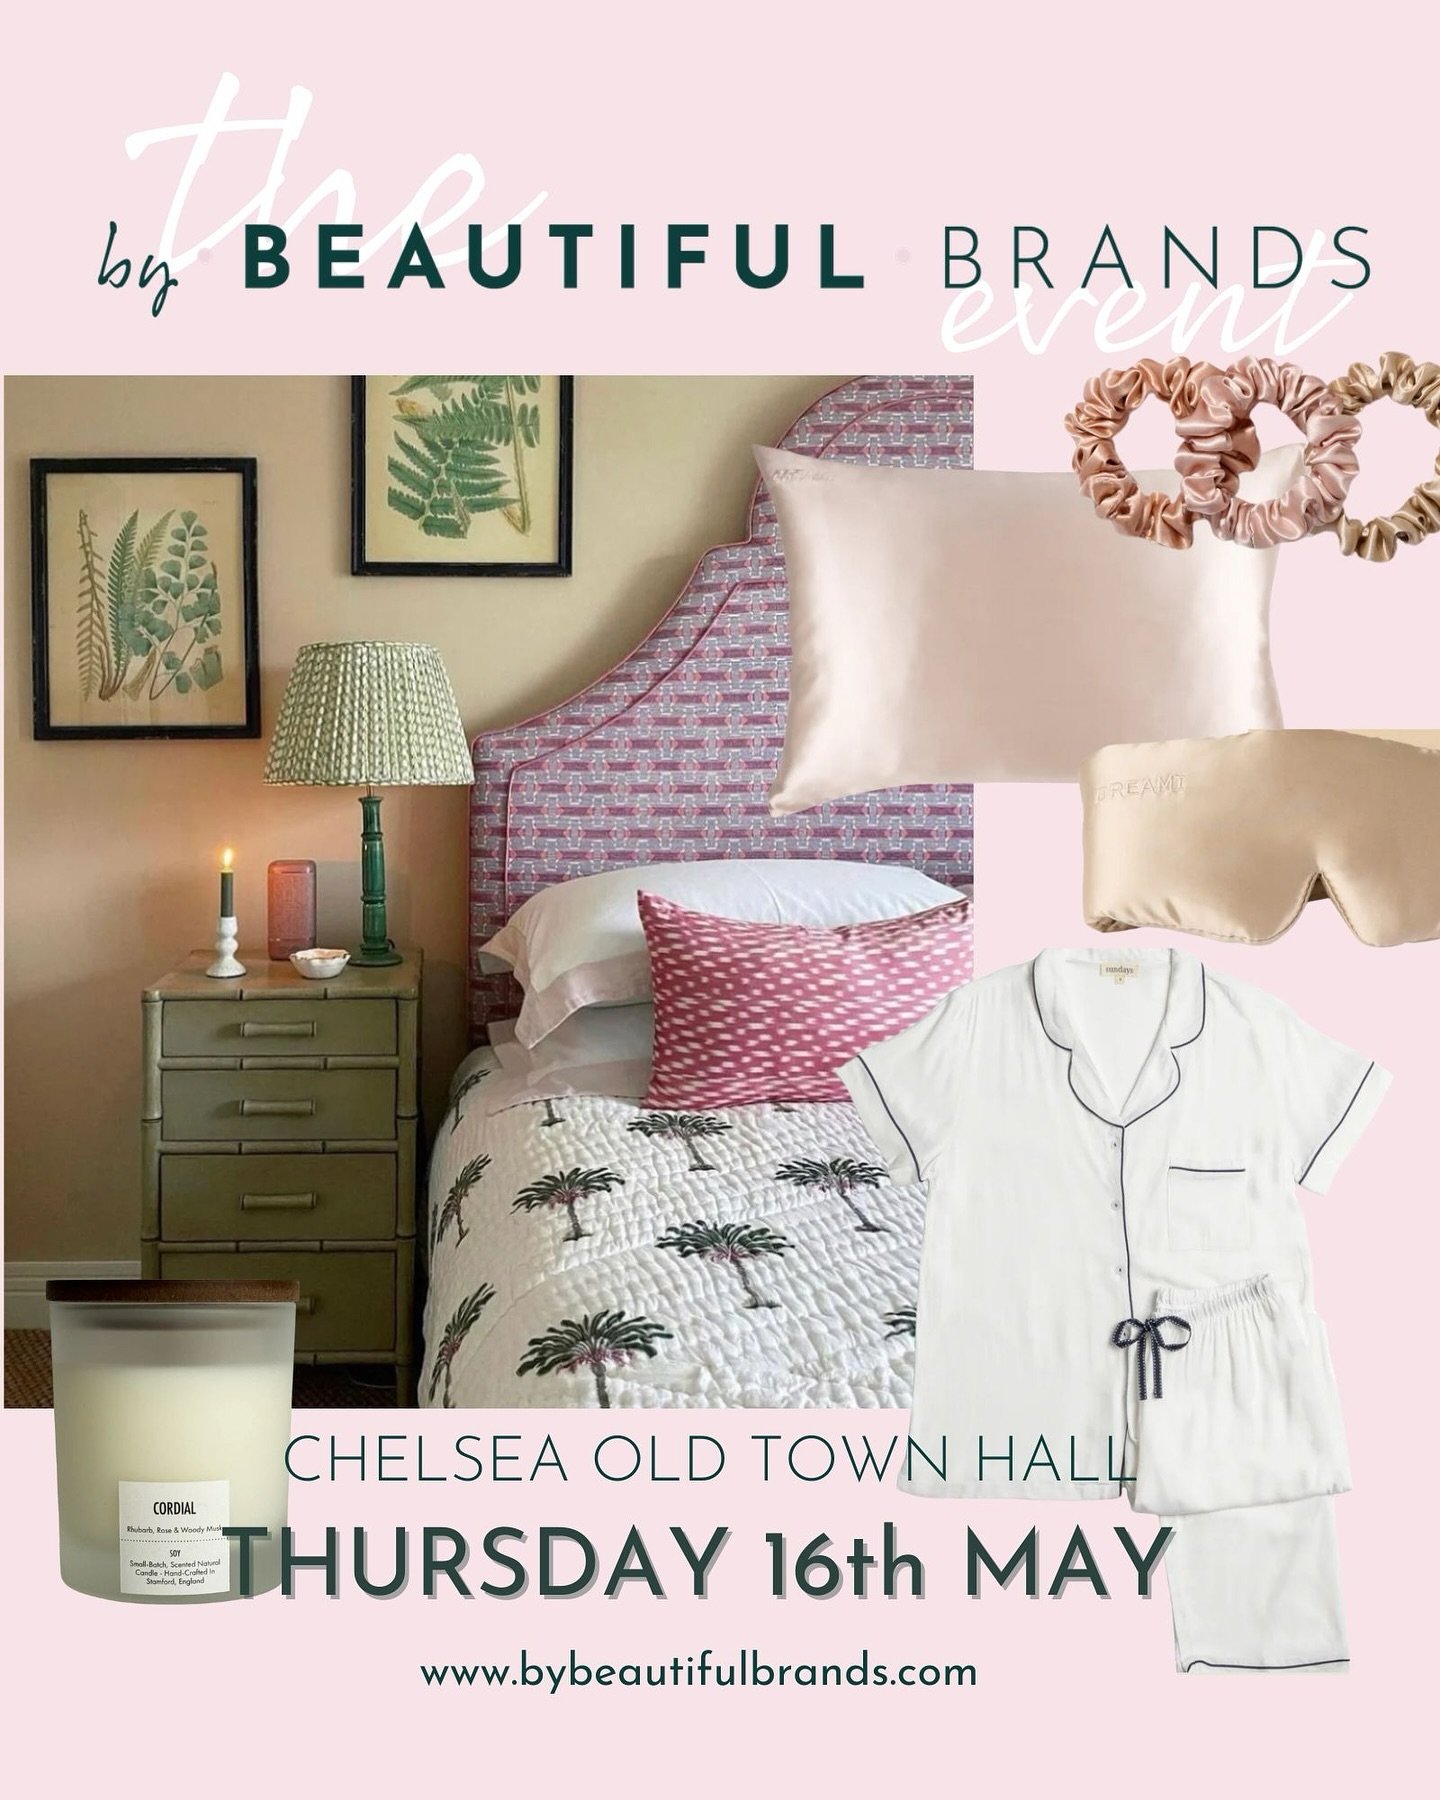 Bed.  One of our favourite places to be!  And comfort is EVERYTHING!  Come and check out all the beautiful brands we have that will help you get that perfect nights sleep&hellip;.
📍Thursday 16th May
📍Chelsea Old Town Hall
📍10am - 7pm
📍60 beautifu